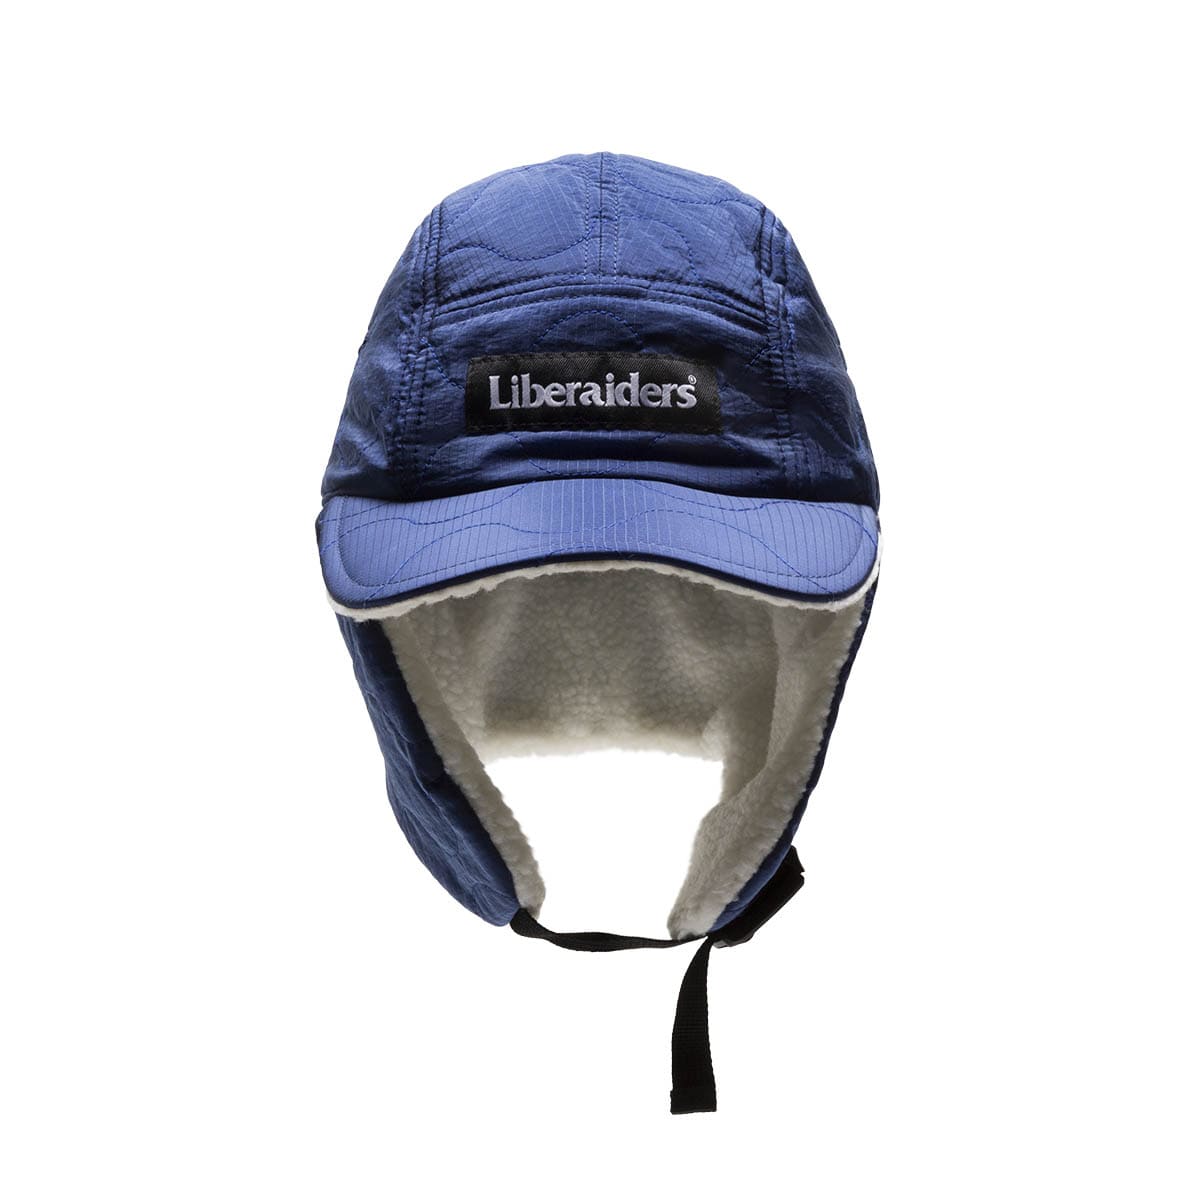 Liberaiders Headwear NAVY / O/S QUILTED NYLON DOG EAR HAT